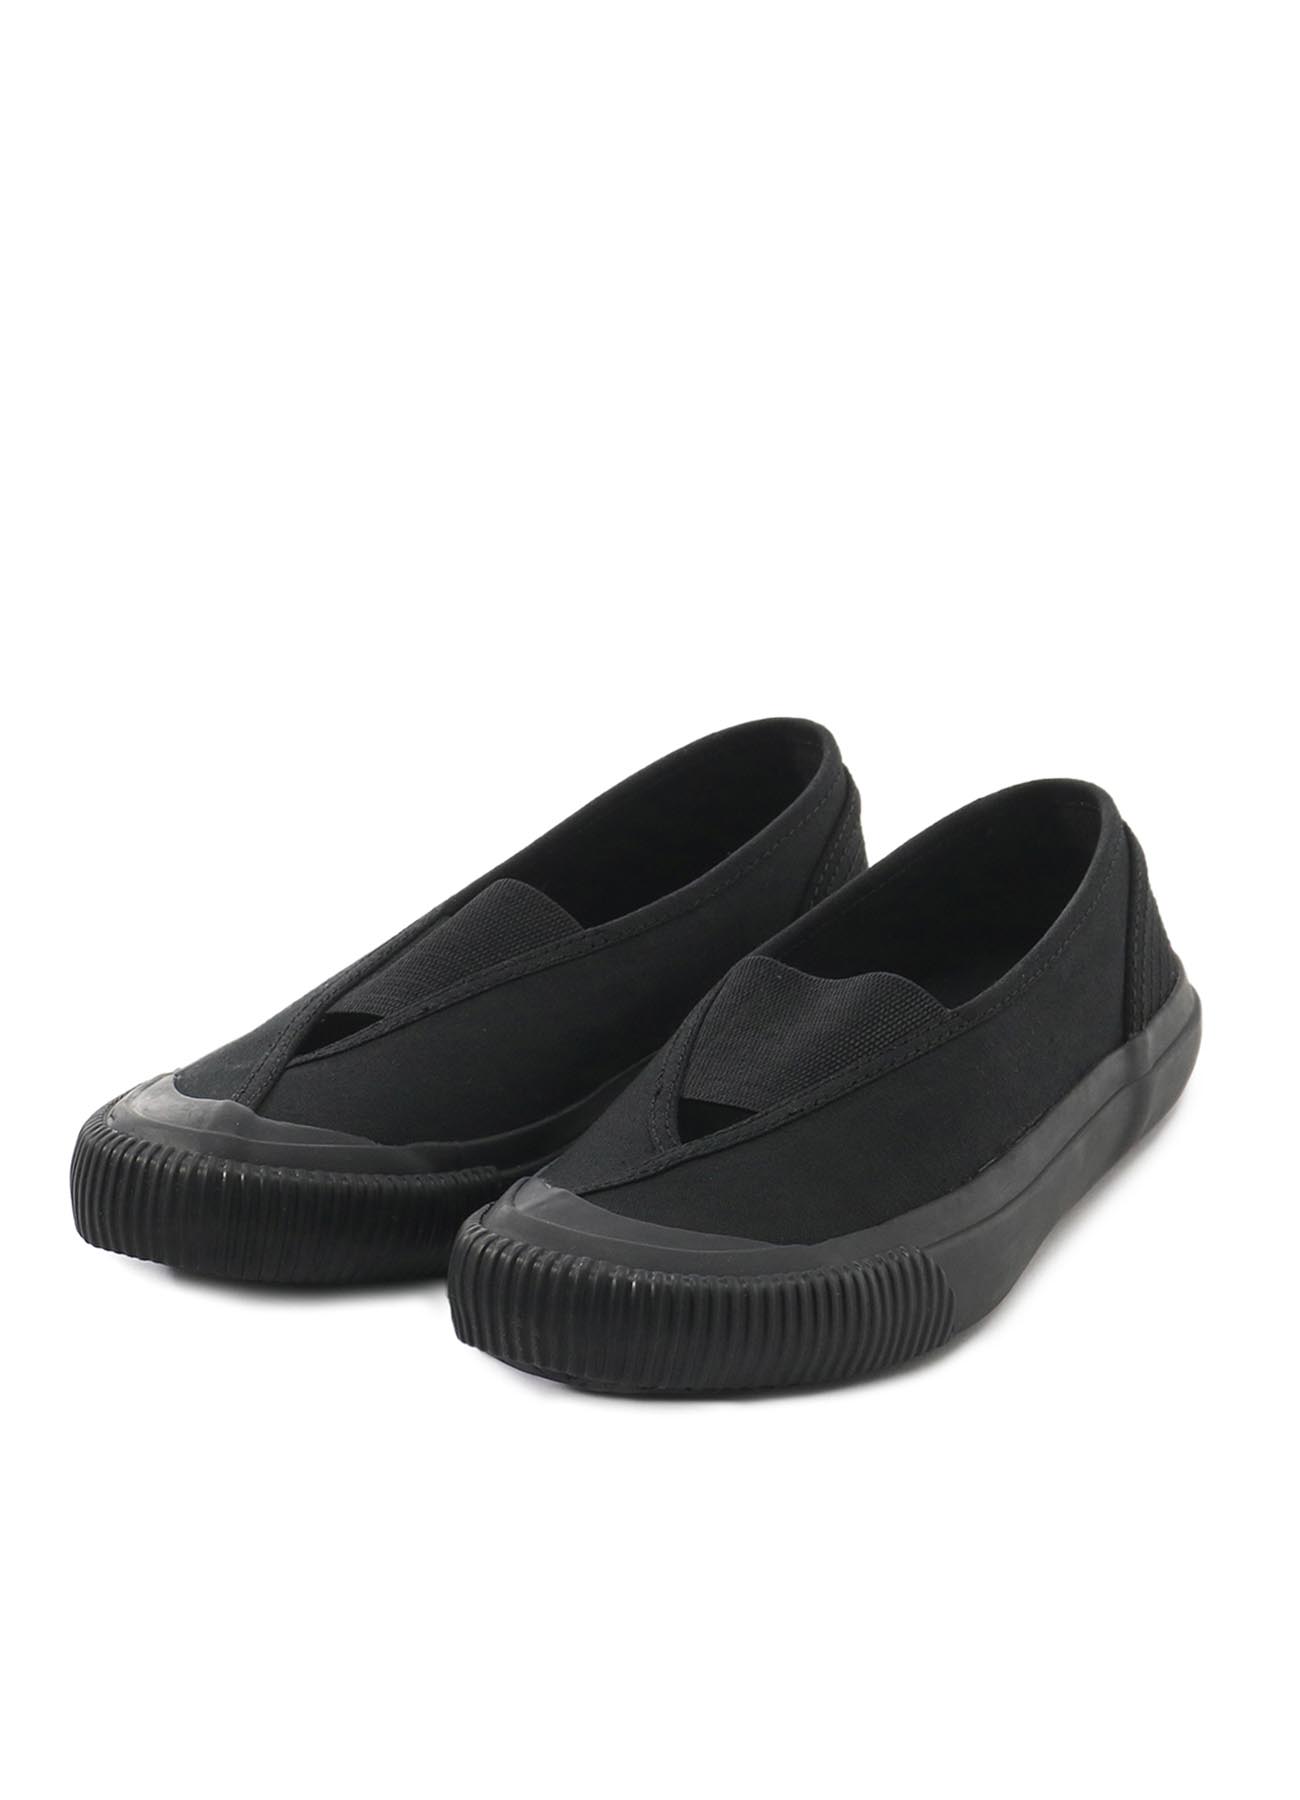 No.11 CANVAS GORE SLIP-ON SNEAKERS